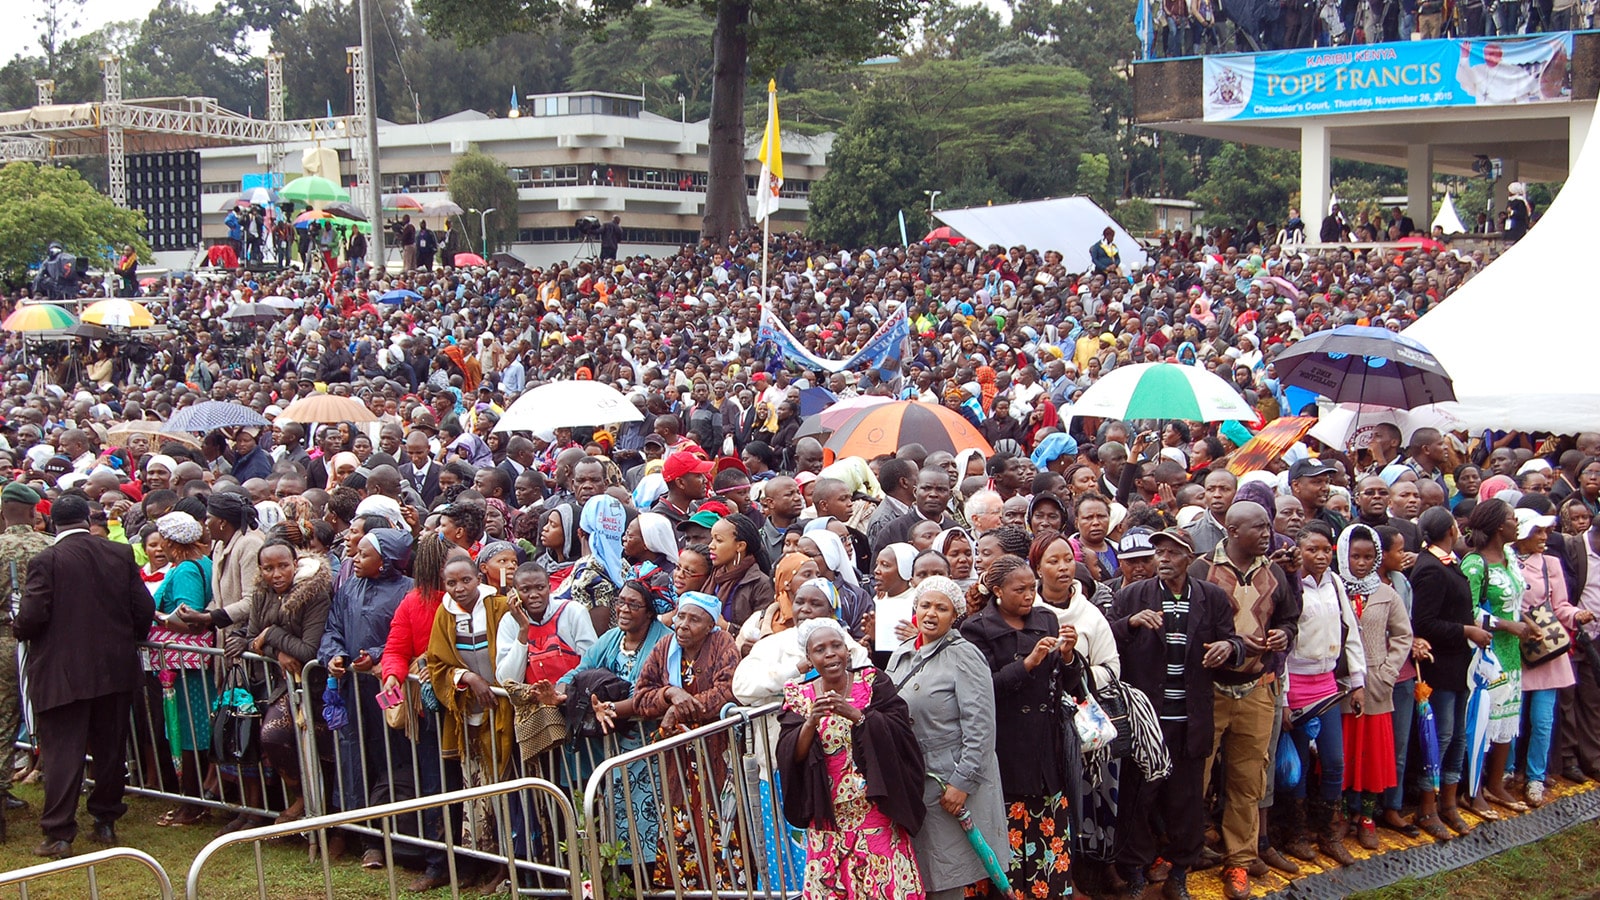 Thousands of Catholics sing as they wait to welcome Pope Francis to Nairobi, Kenya, on Nov. 24, 2015. Africa has traditionally been a deeply religious continent. RNS photo by Fredrick Nzwili